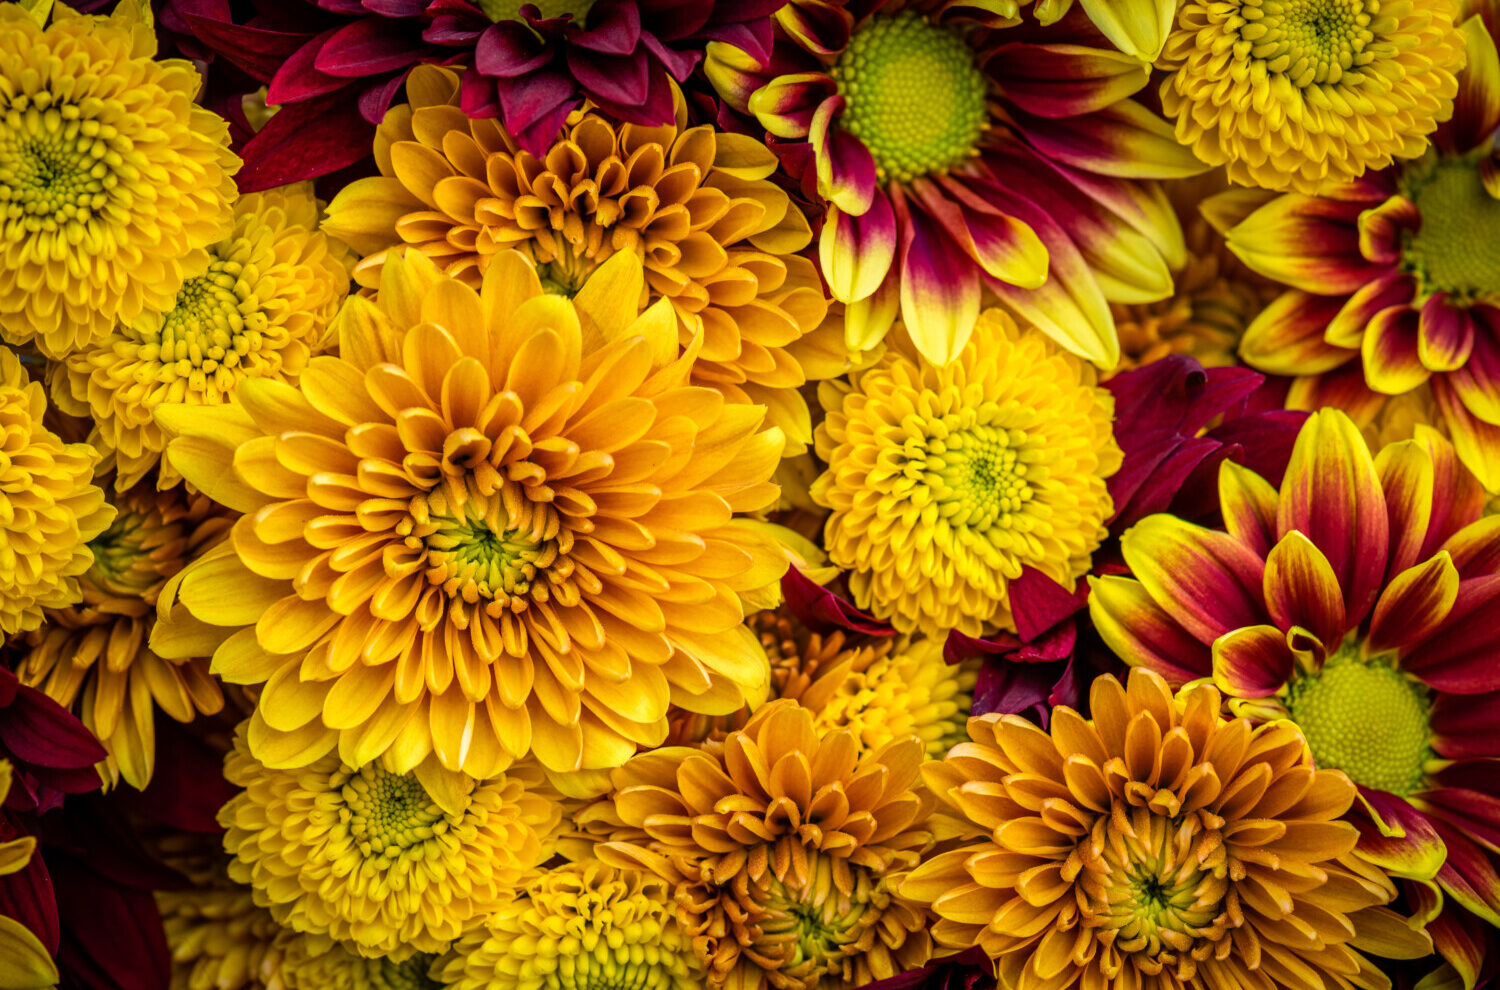 Mums in gold, red and orange colors